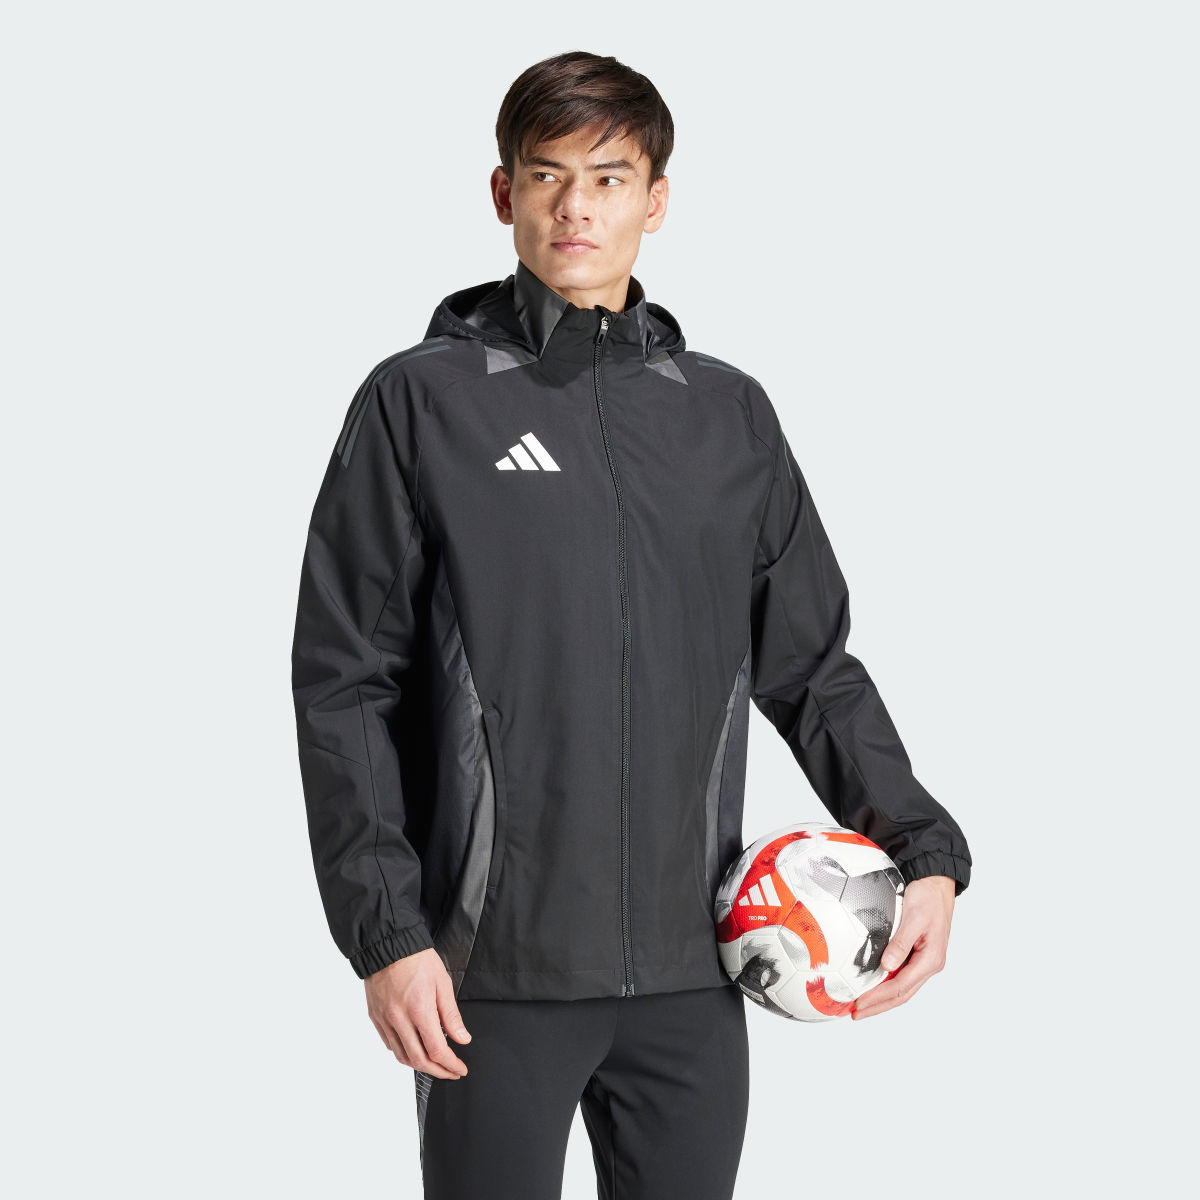 Adidas Tiro 24 Competition All-Weather Jacket. 4